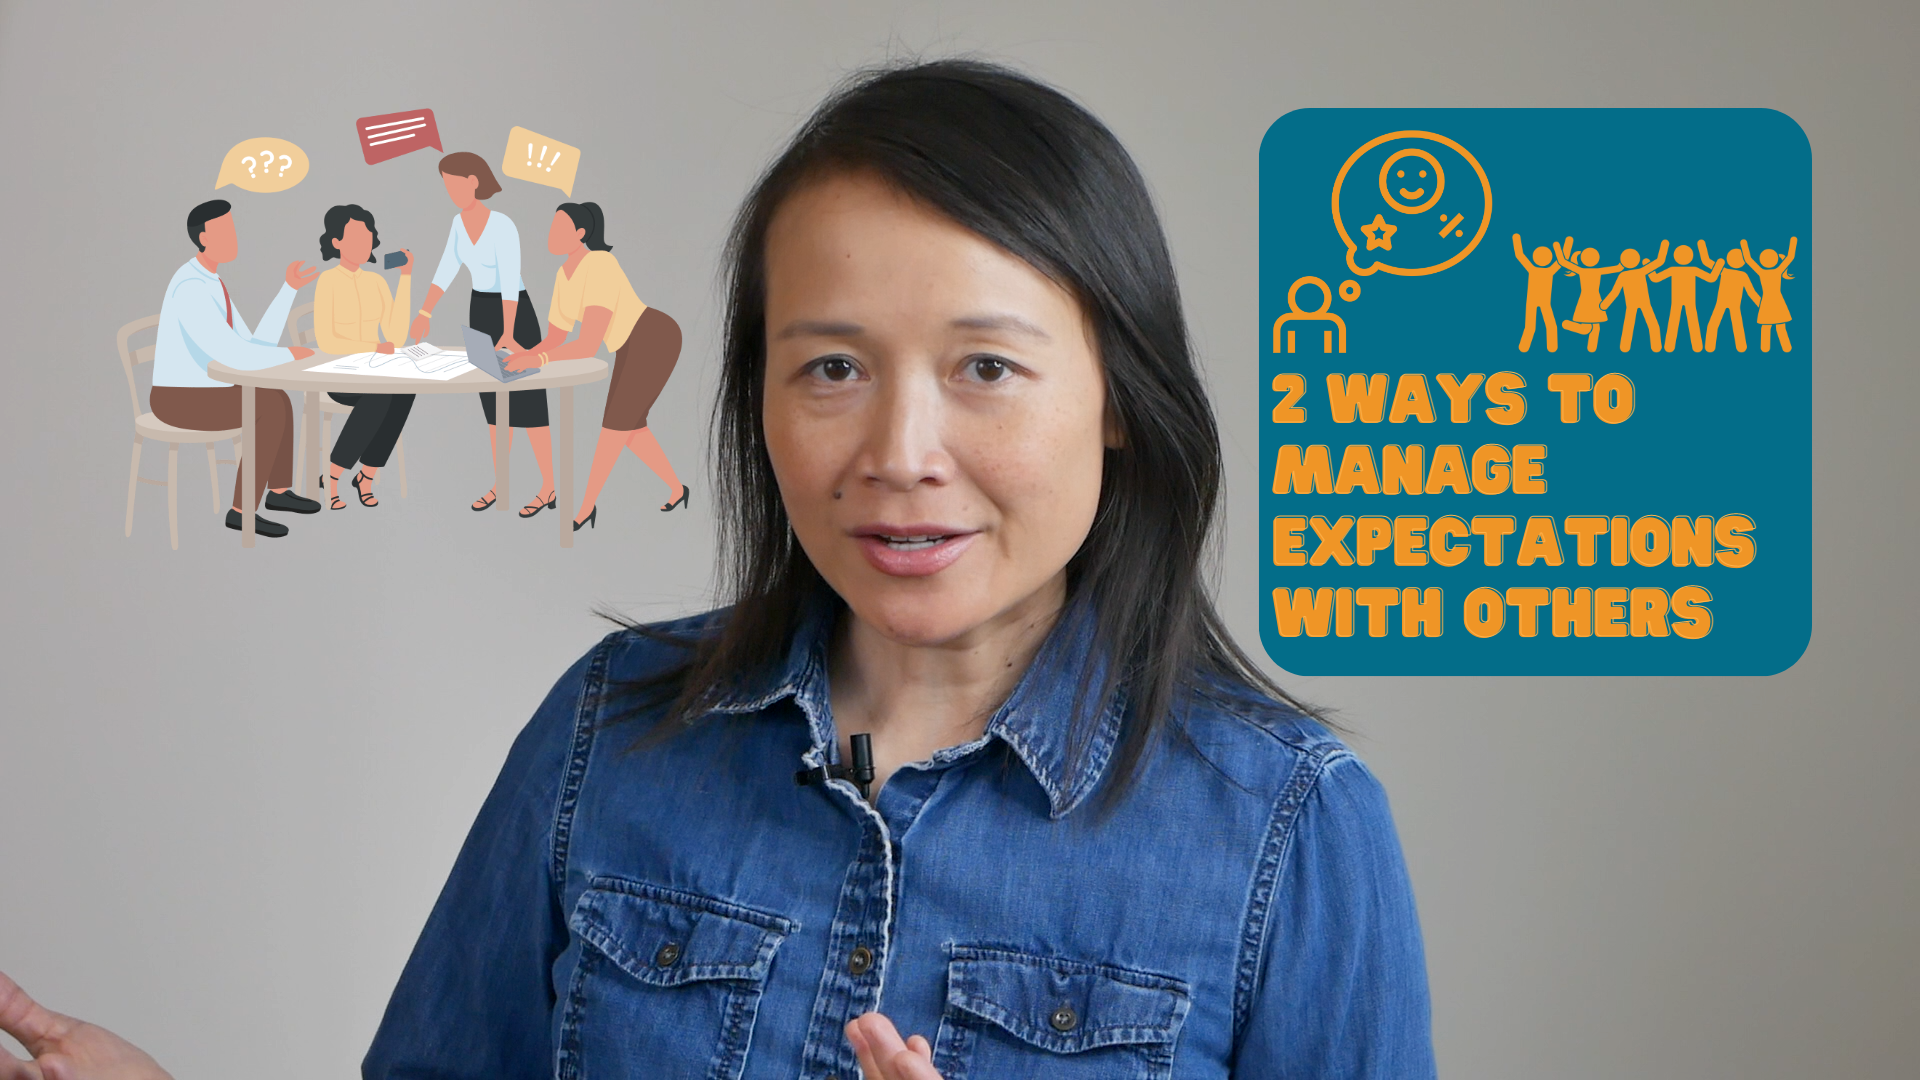 2 Ways to Manage Expectations with Others